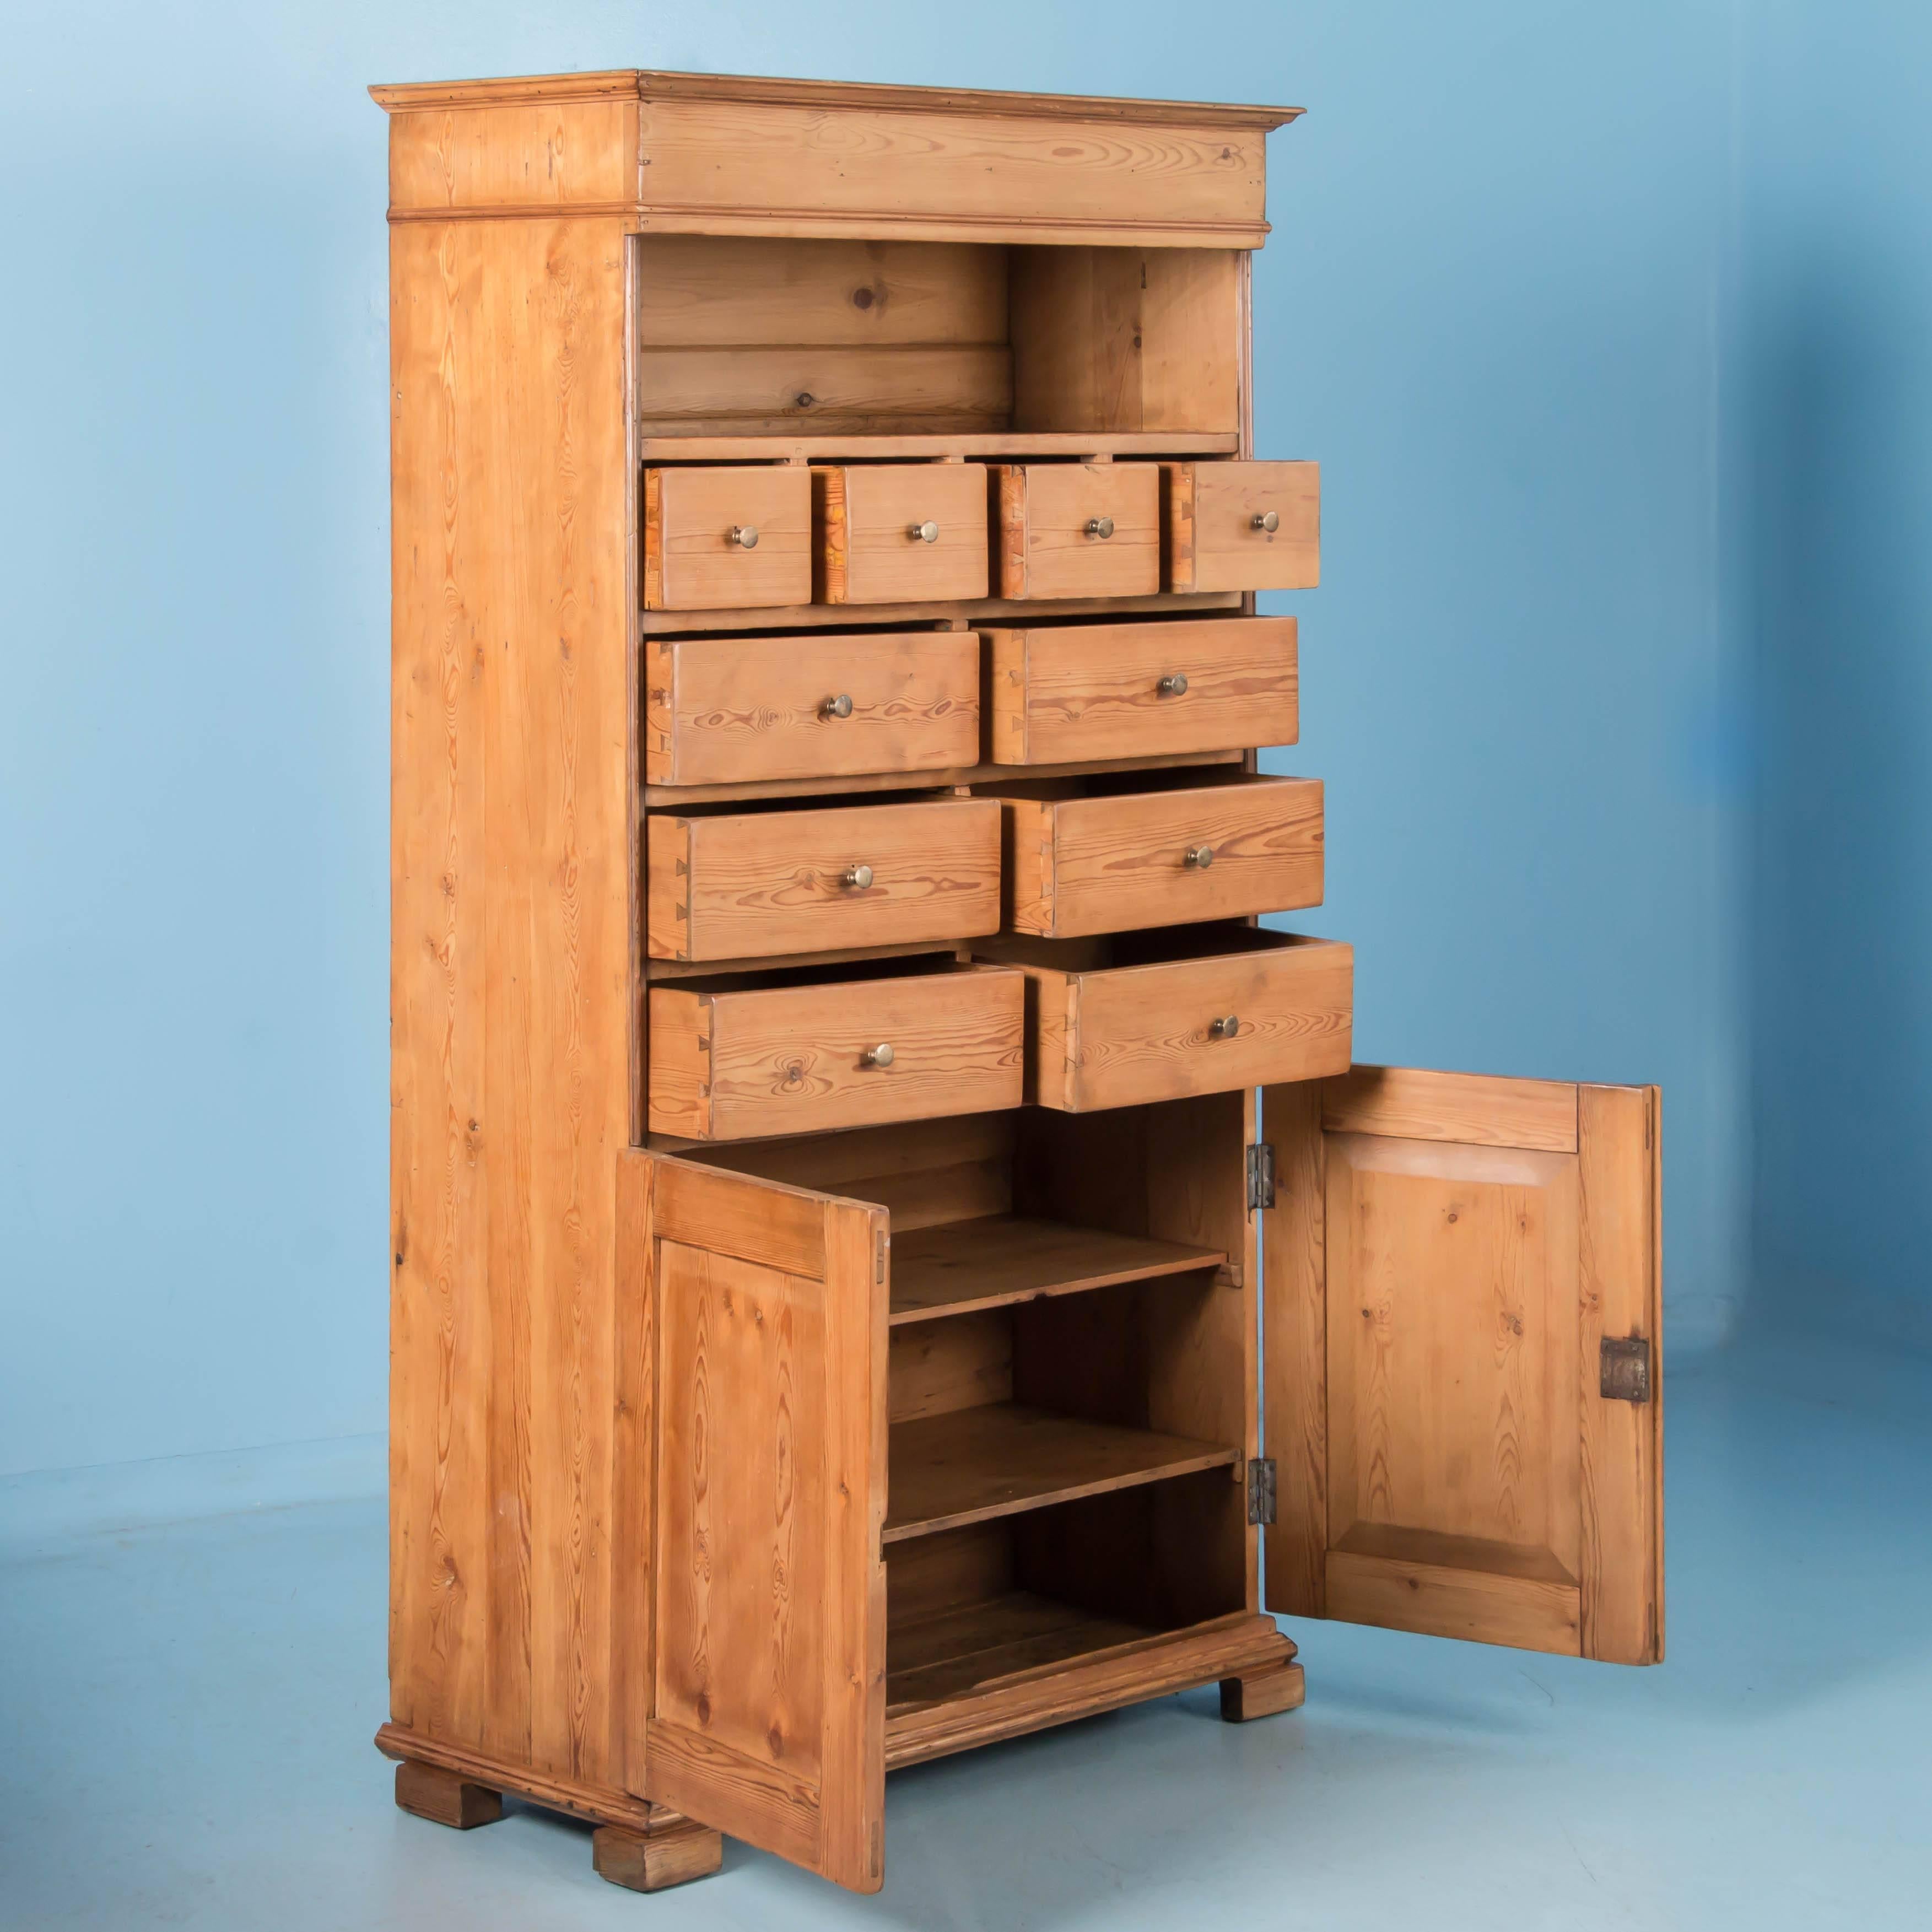 Tall antique pine cabinet from Denmark with an assortment of storage options, from the open space above to the drawers in the middle and cupboard doors below. There are a total of ten drawers, four small drawers above six half drawers. Notice how